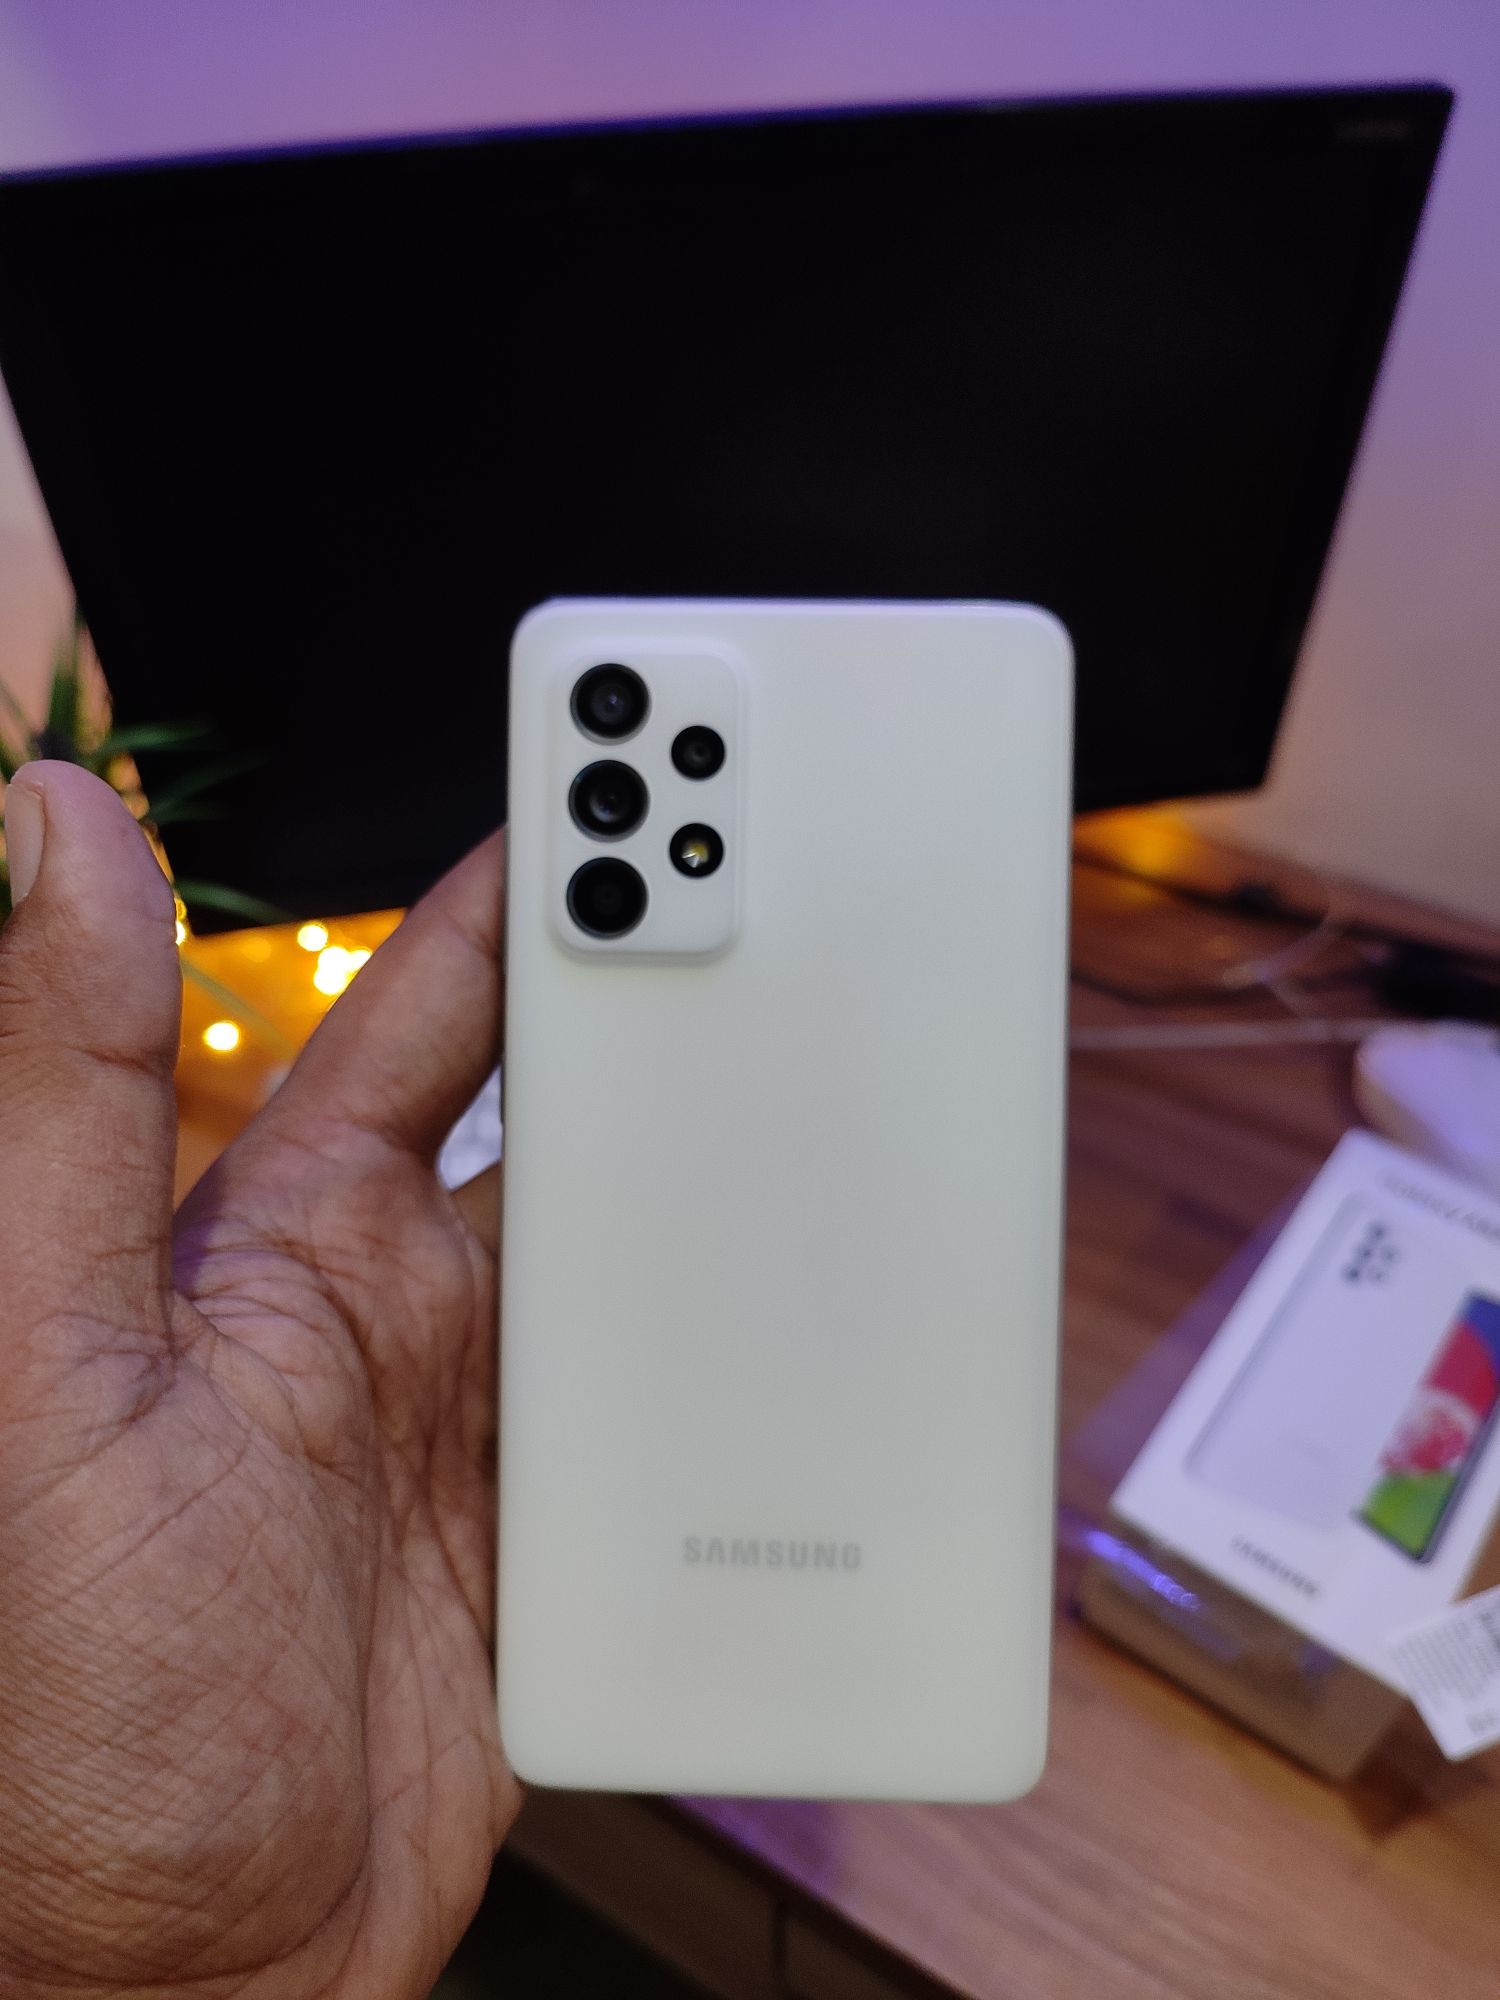 premium samsung a52s 5g smartphone white only unboxed